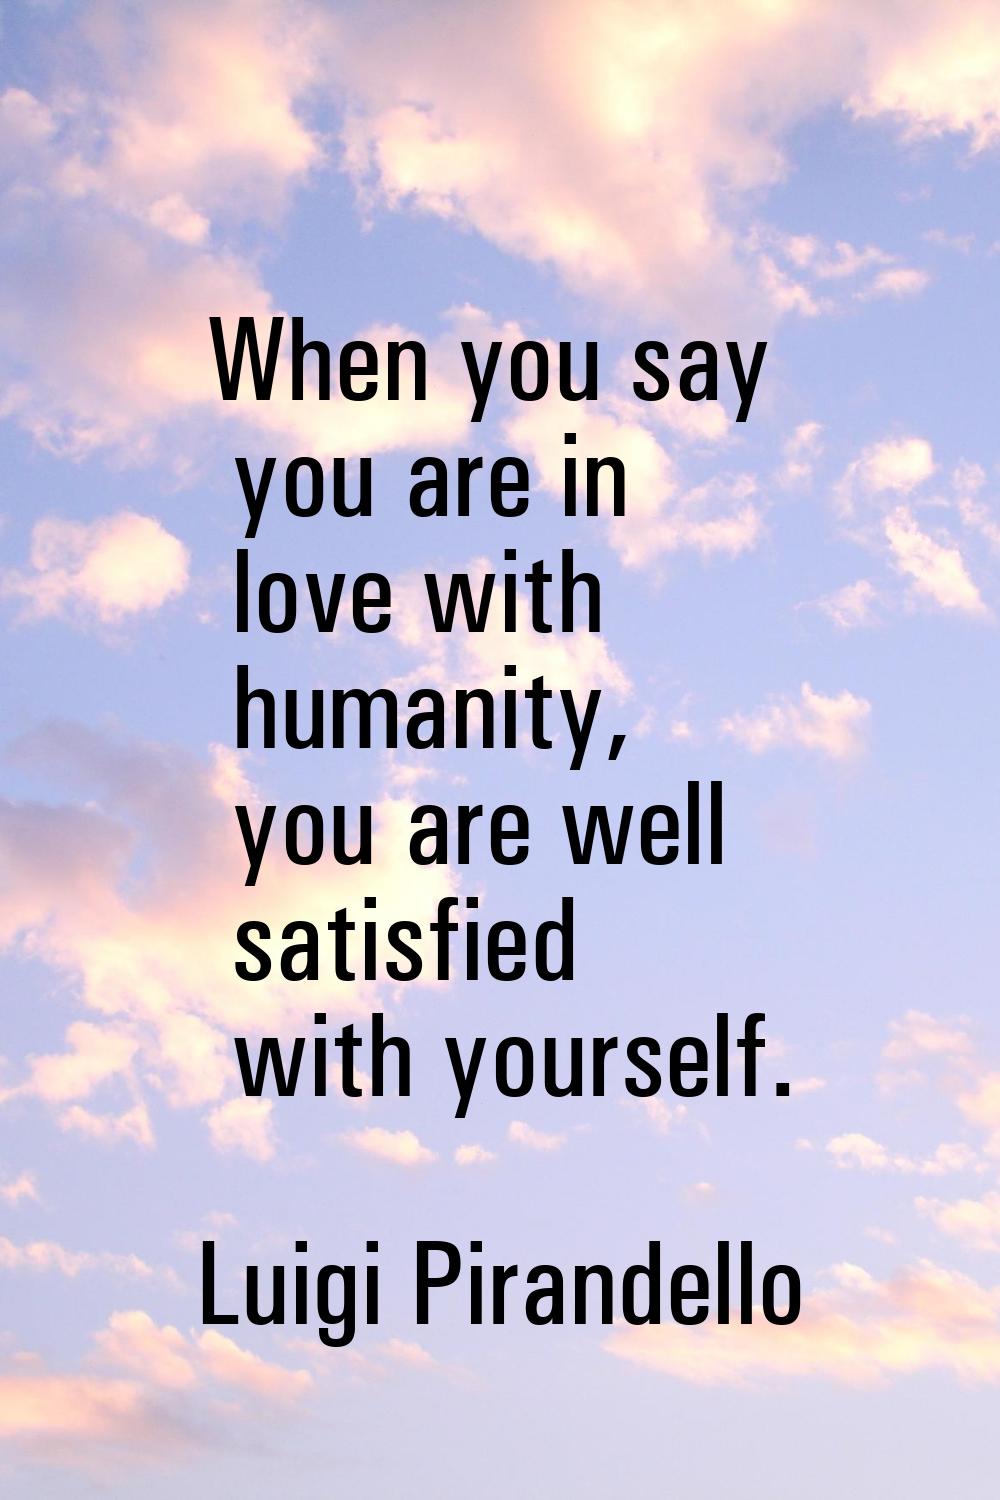 When you say you are in love with humanity, you are well satisfied with yourself.